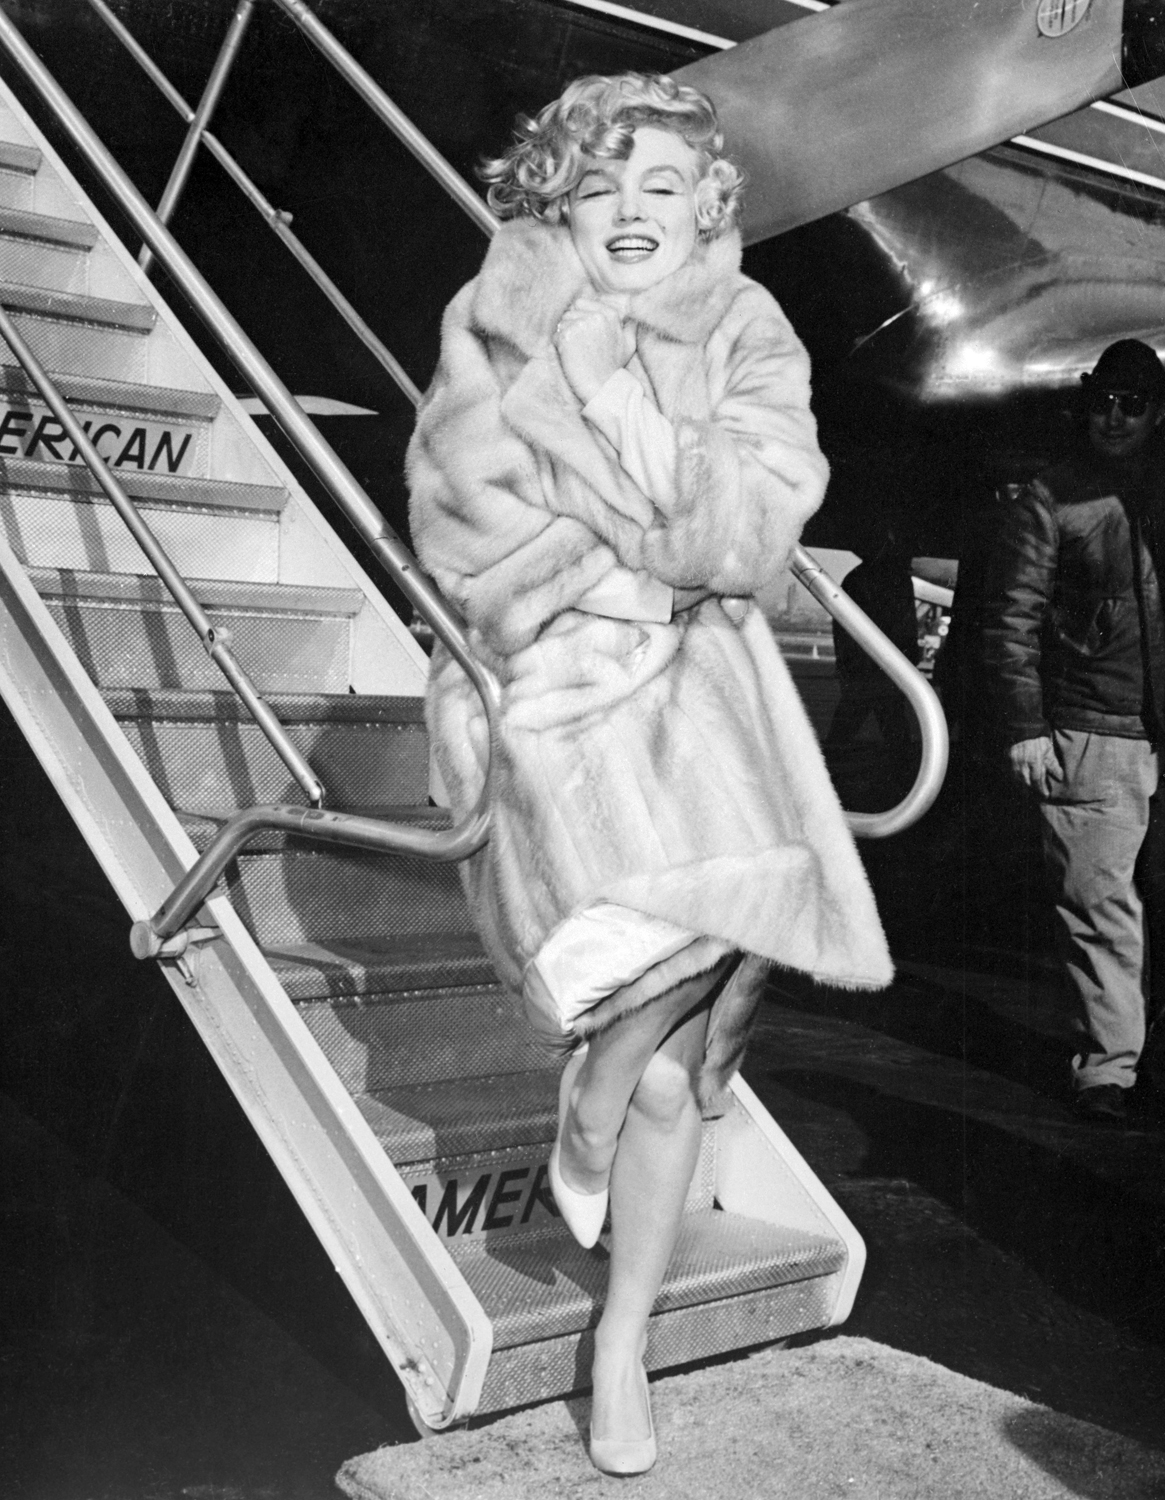 Monroe snuggles into her fur coat to escape the icy winds at La Guardia airport in New York City in 1959.